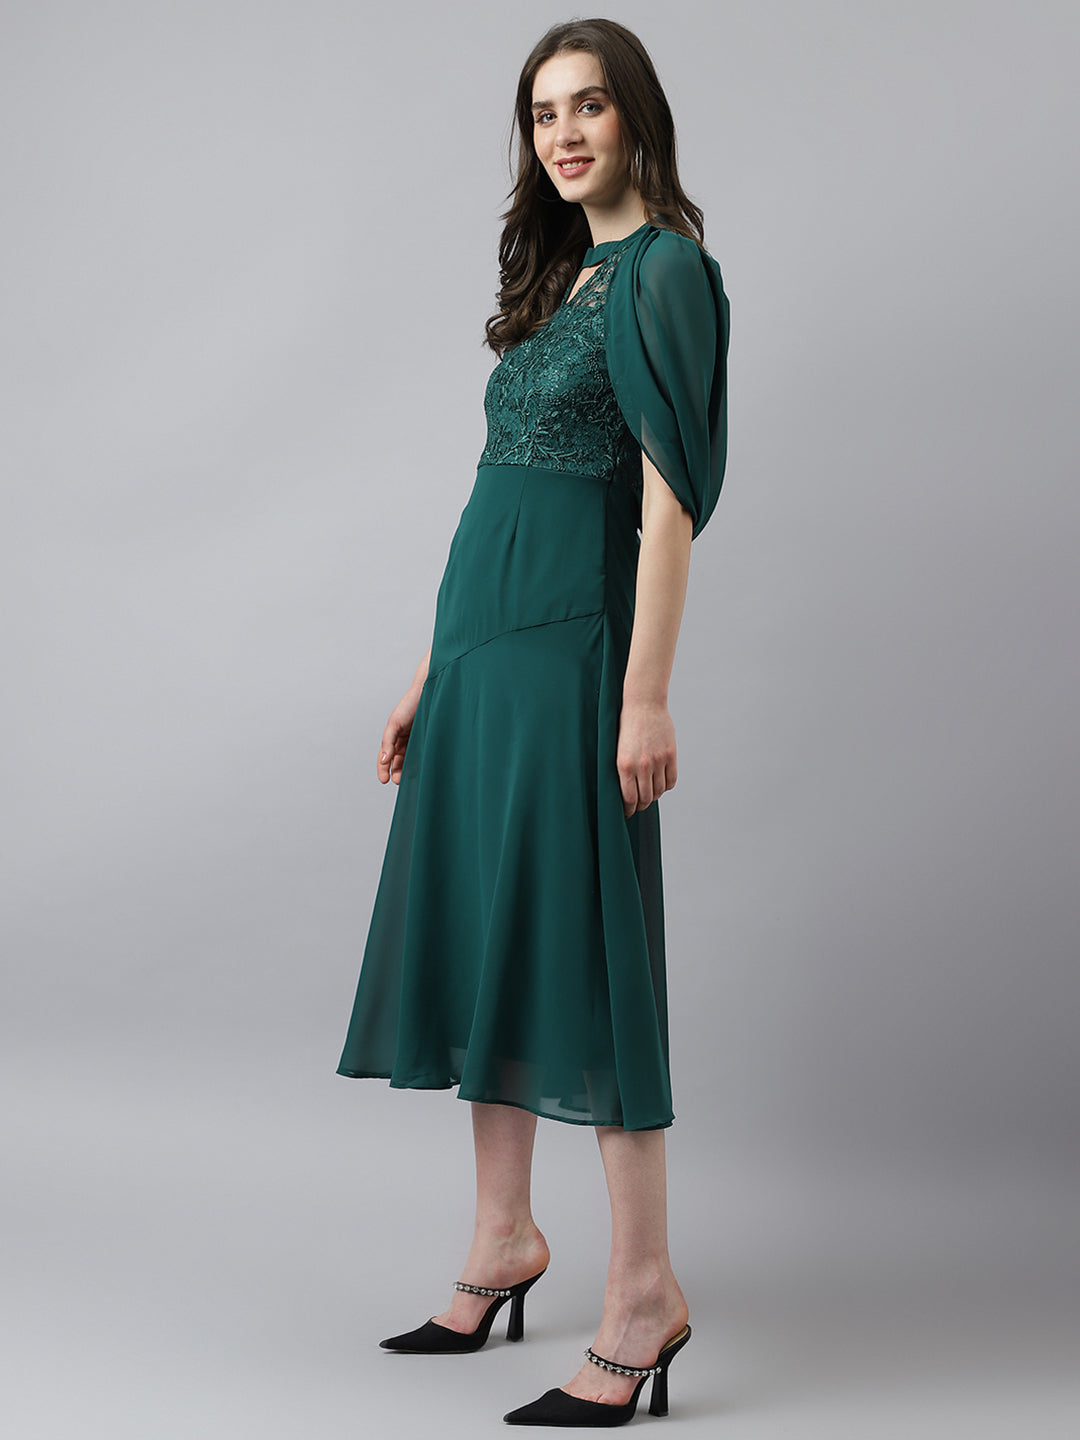 Greenbottle A-Line Lace Designer Dress With Cape Sleeves